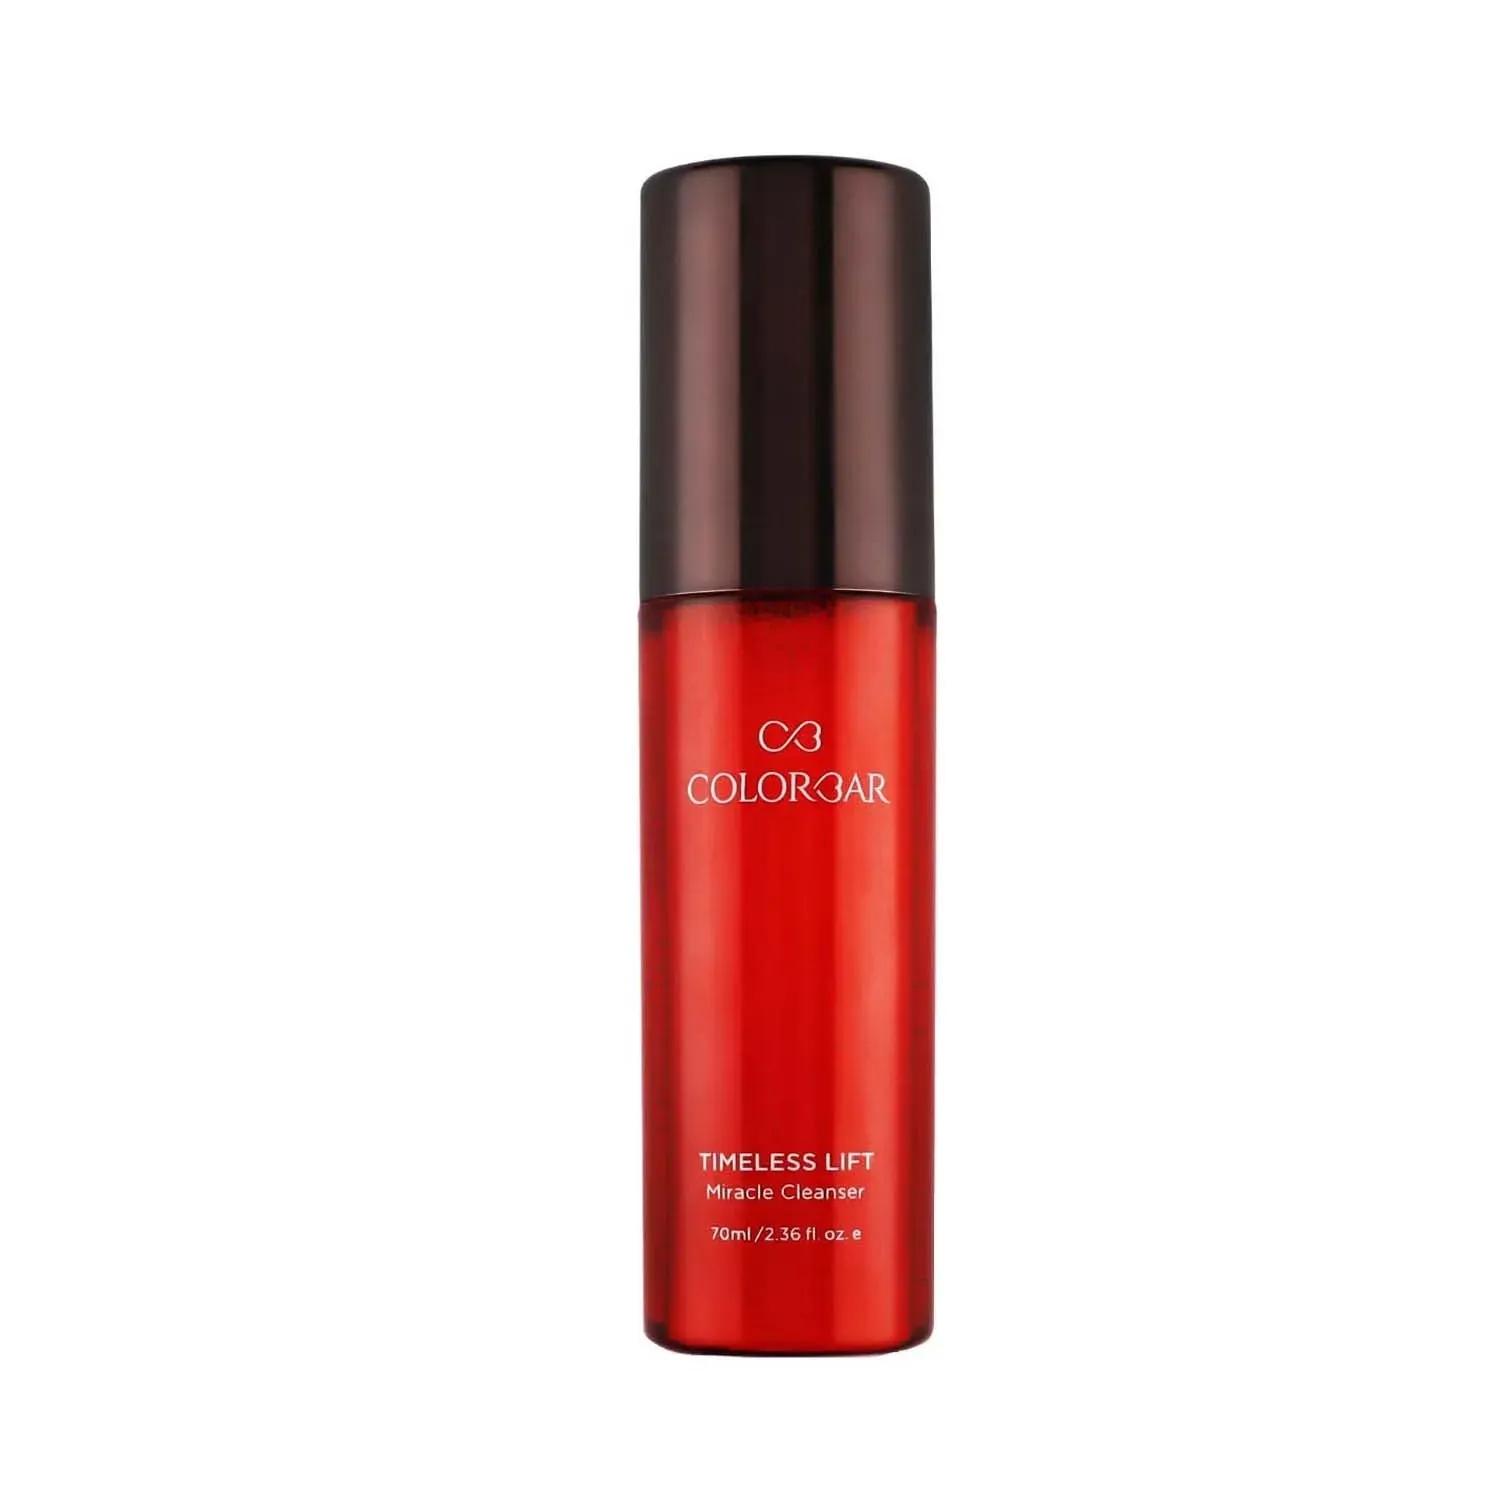 colorbar timeless lift miracle cleanser (70ml)